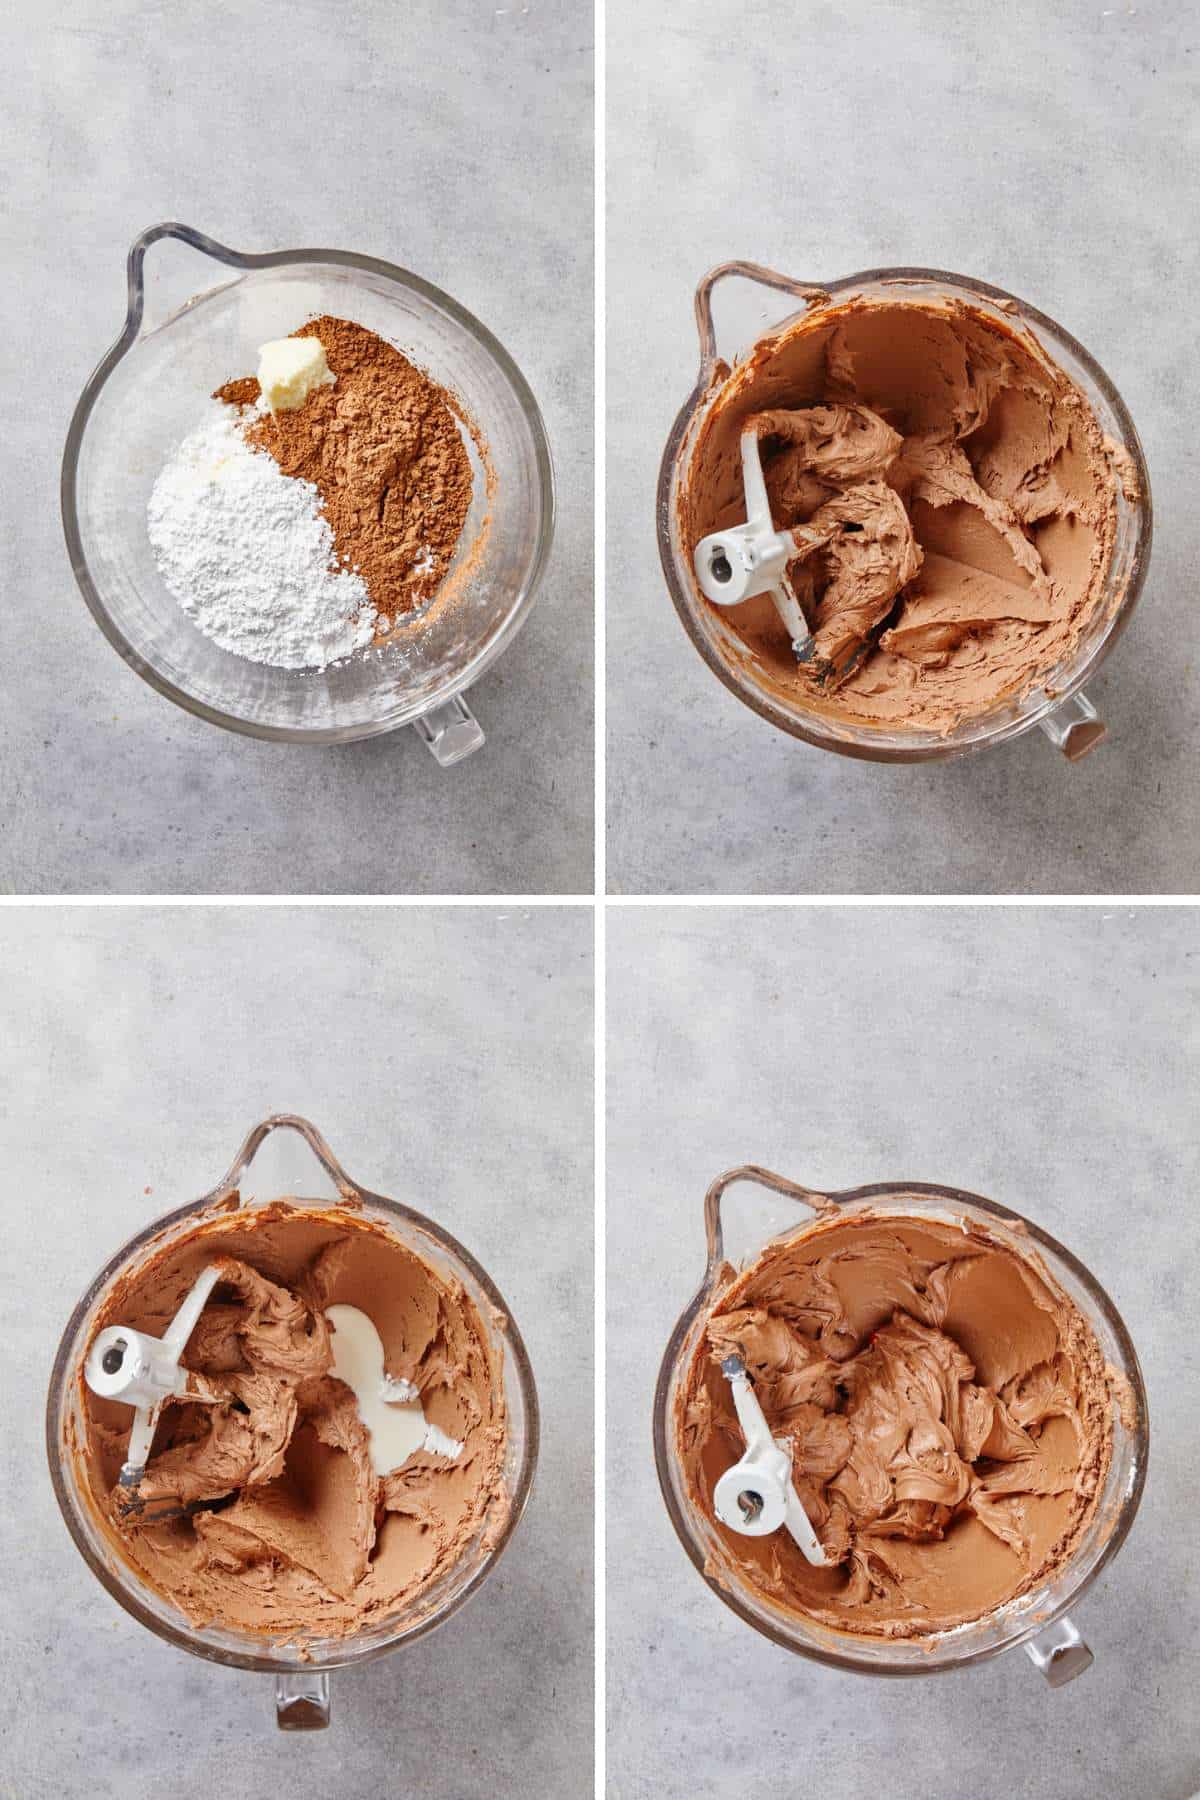 A collage showing the steps for making the chocolate frosting.